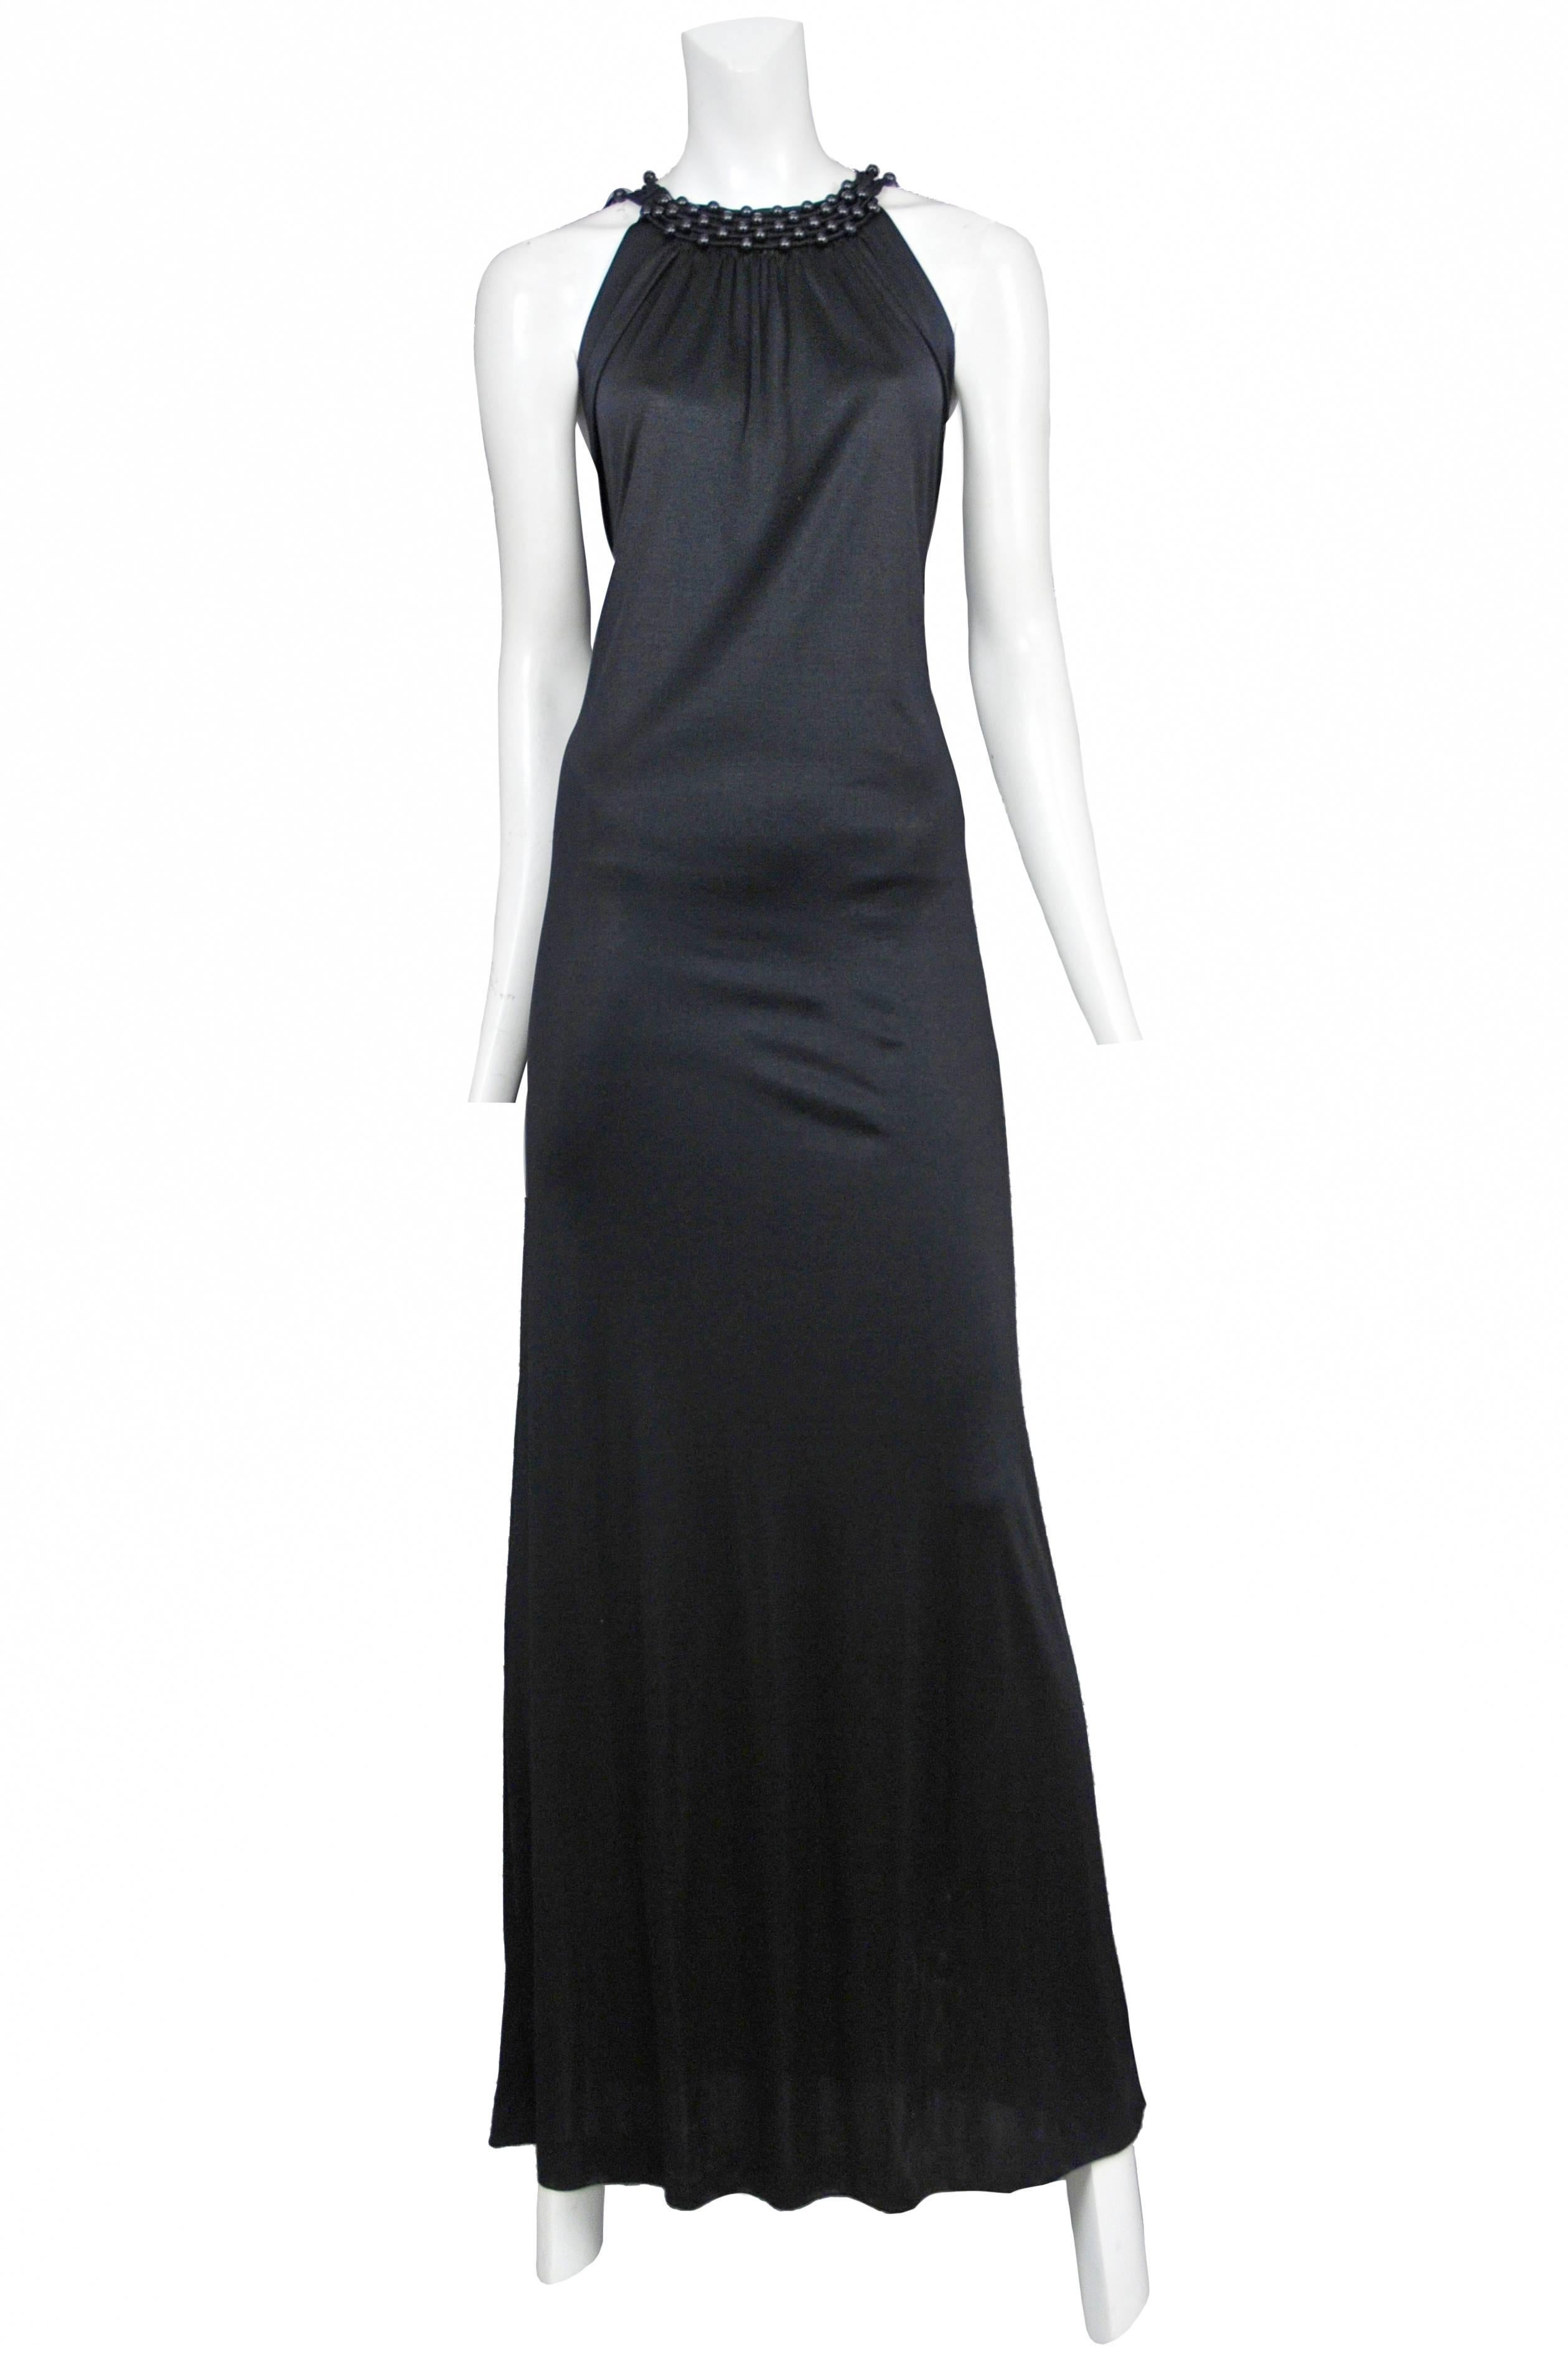 Loris Azzaro black jersey gown with open back lattice fringe work and wood bead detail. Circa 1971 